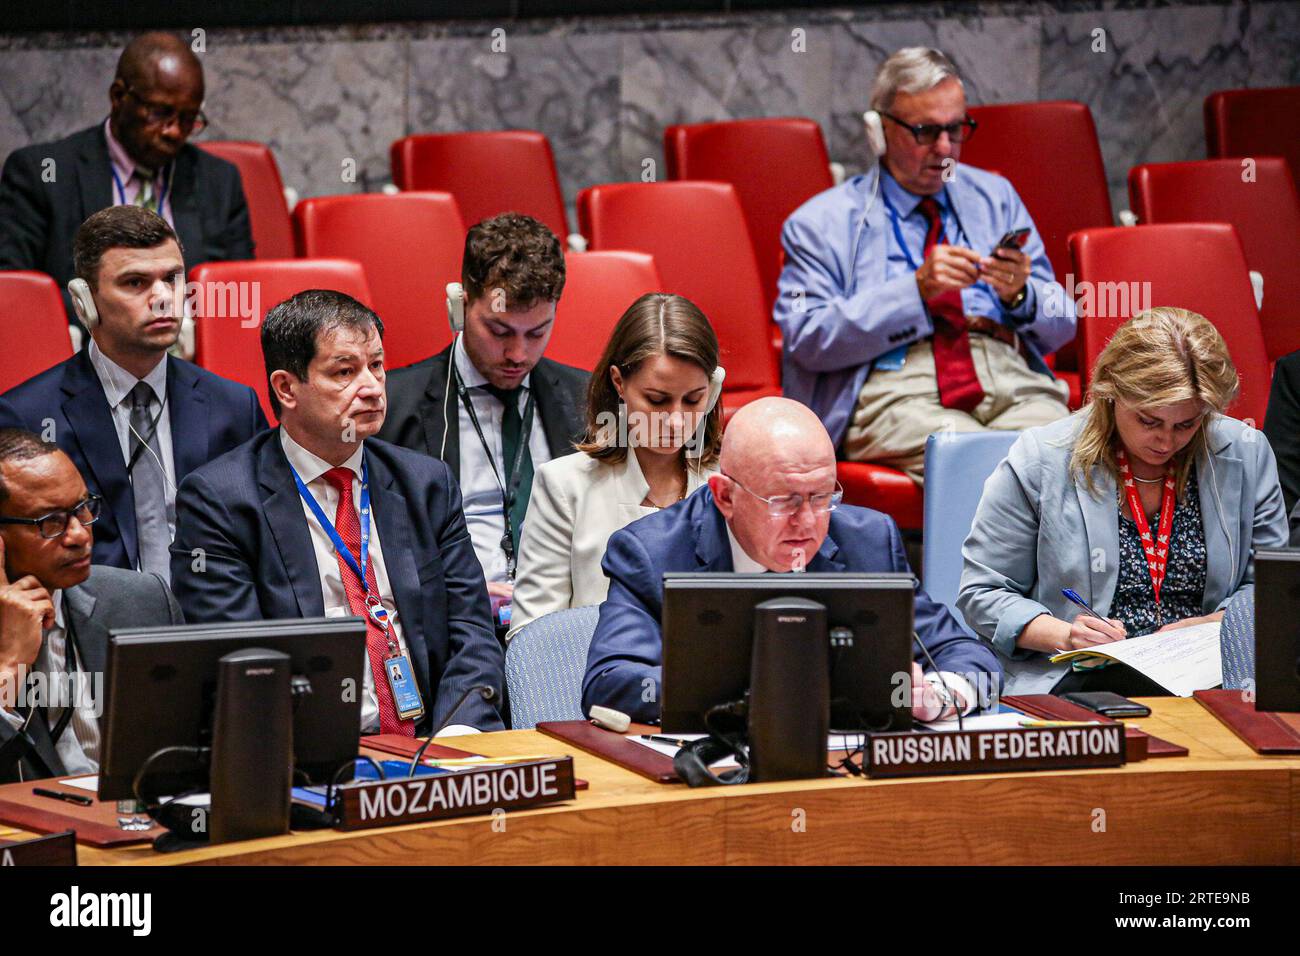 New York, New York, USA. 12th Sep, 2023. Permanent Ambassador of Russia to UN, VASSILY NEBENZIA, speaks at a UN Security Council meeting focused on Threats to International Peace and Security in which the focus was on all wars yet focused primarily on issues of the Ukraine war and deep long term effects; locally and globally. As the UN prepares for top officials meeting next week for the annual General Assembly, this year expects to have an abundantly high agenda of topics on the table that have accumulated in the pre and post-COVID years spanning roughly 3-4 years. (Credit Image: © Bianc Stock Photo